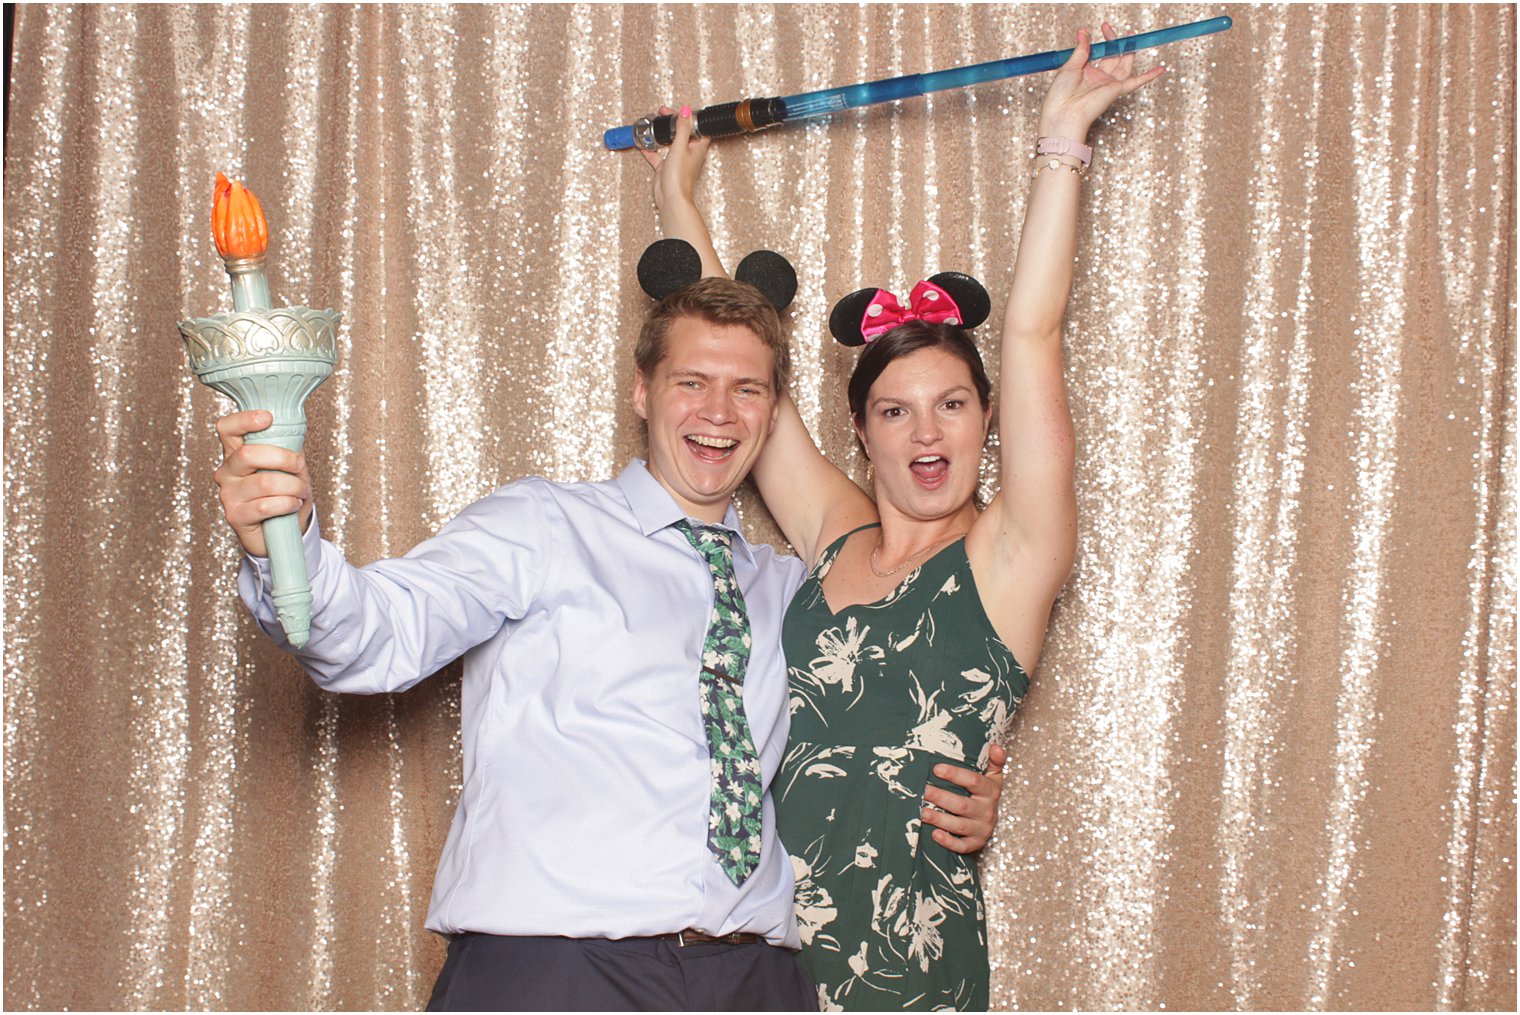 couple poses in mouse ears during photo booth fun